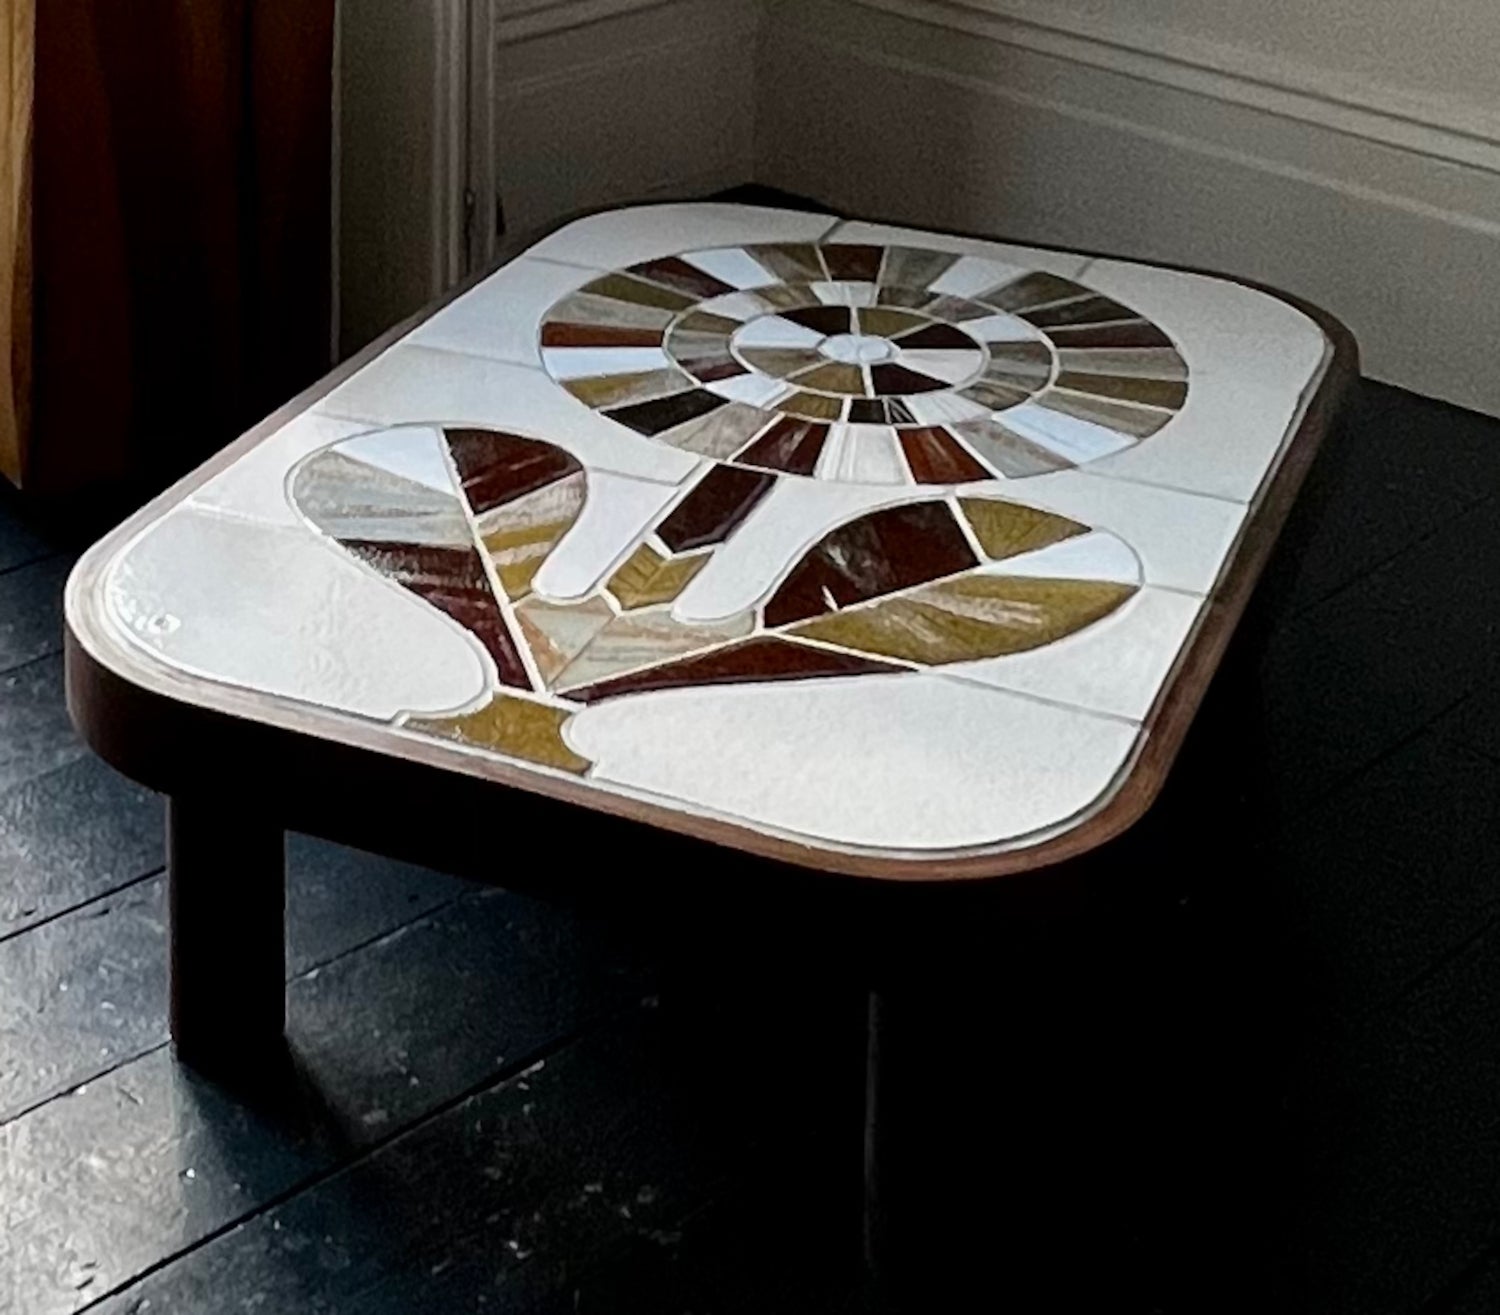 A ceramic coffee table by the French ceramicist Roger Capron. Glazed tiles in a palette of greens and browns form the modernist outline of a flower, set against a lighter neutral background. The heavy table legs are wood and the top is finished with